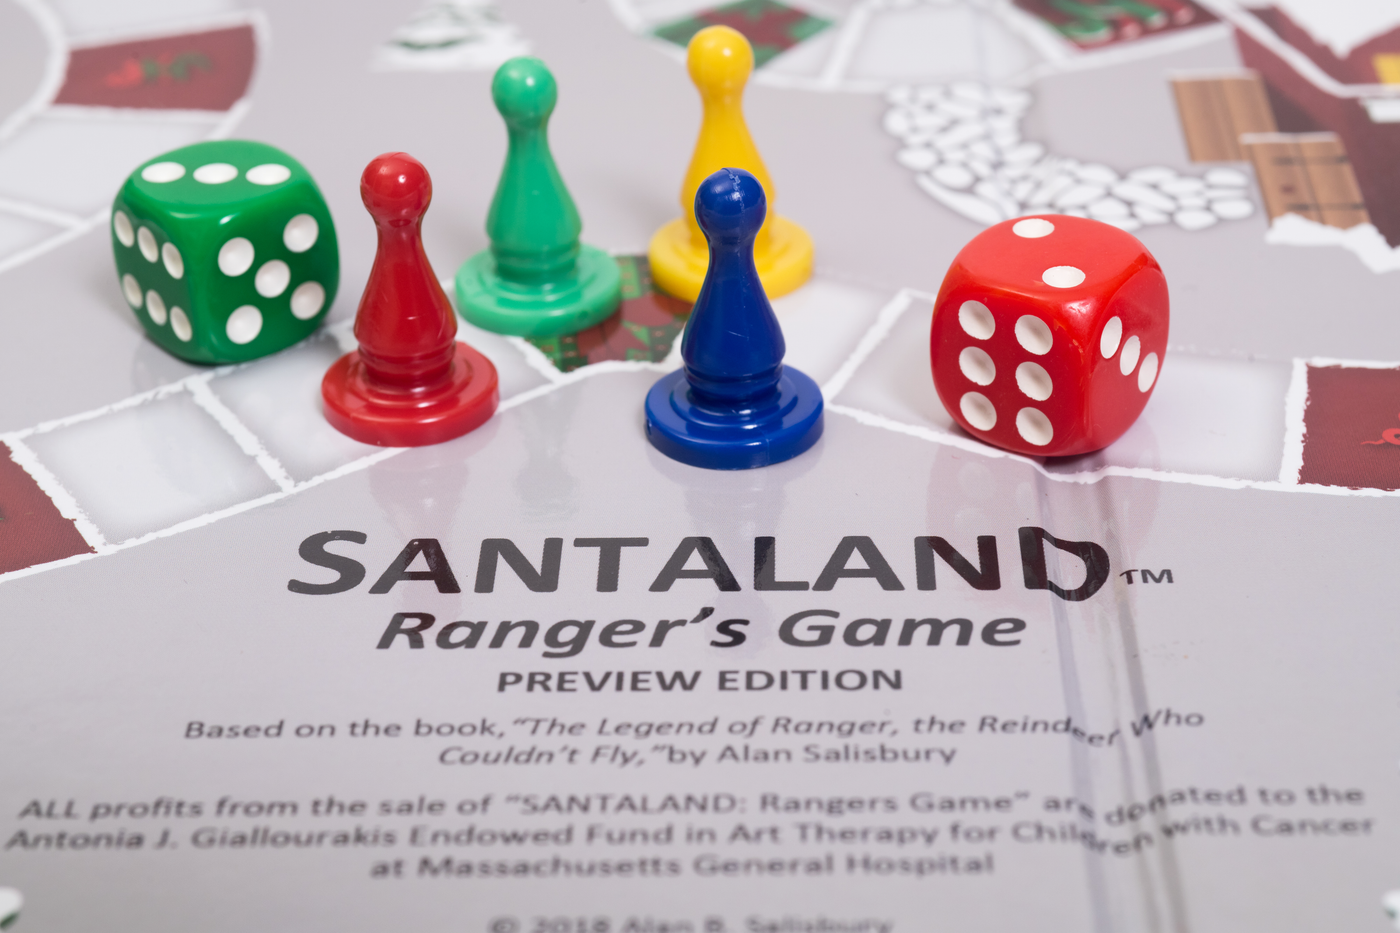 Santaland board game with game pieces showing